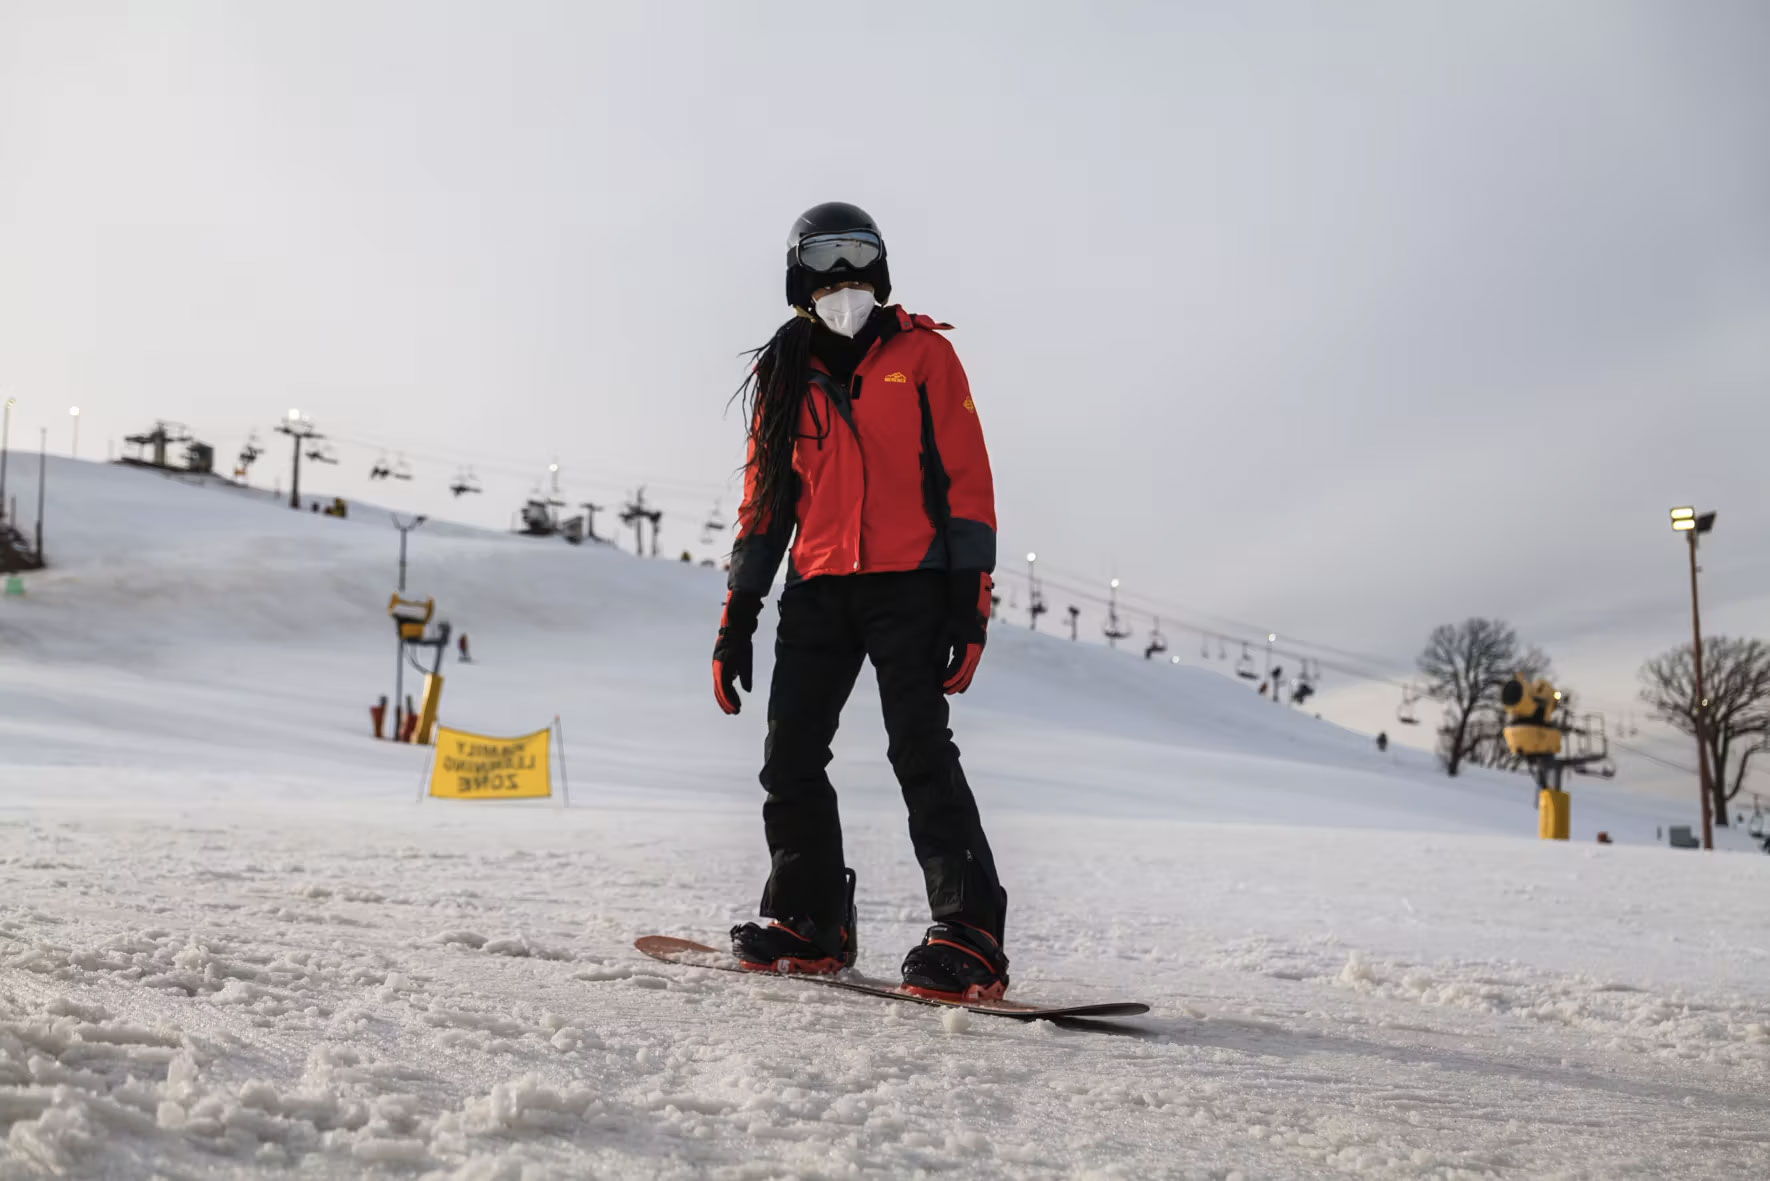 Girl snowboarding wearing red jacket and black pants